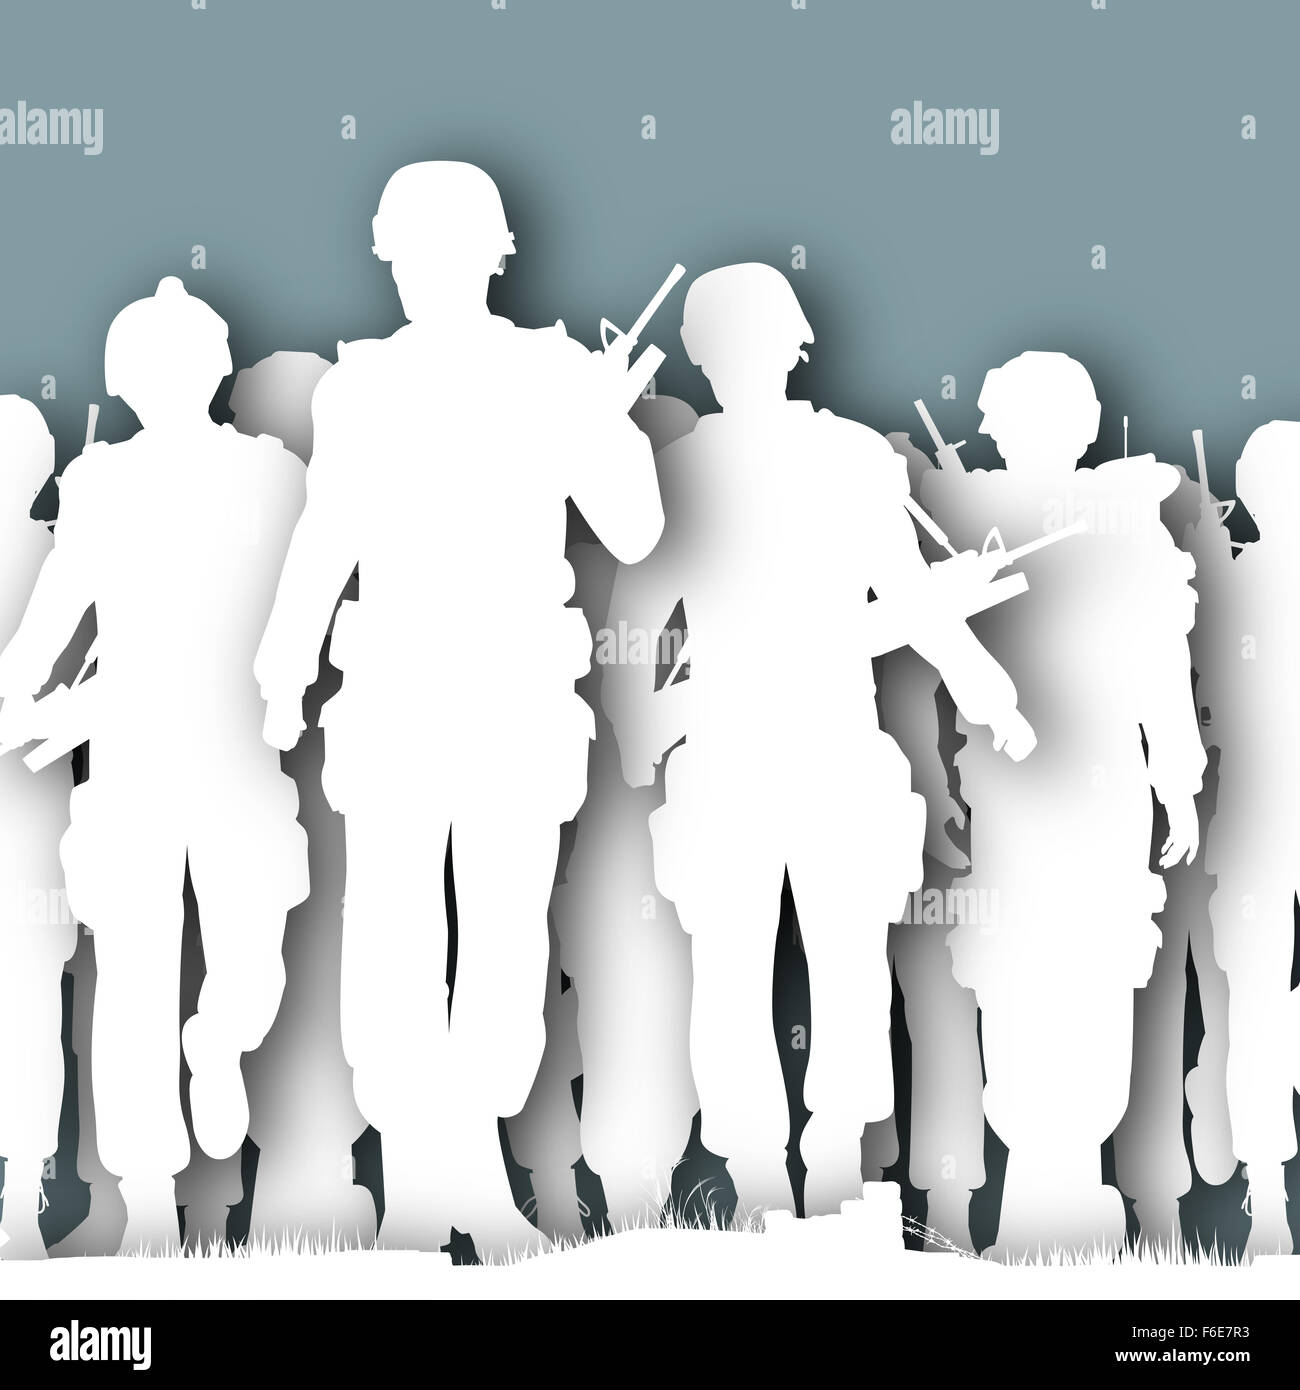 illustrated cutout silhouettes of armed soldiers walking together Stock Photo